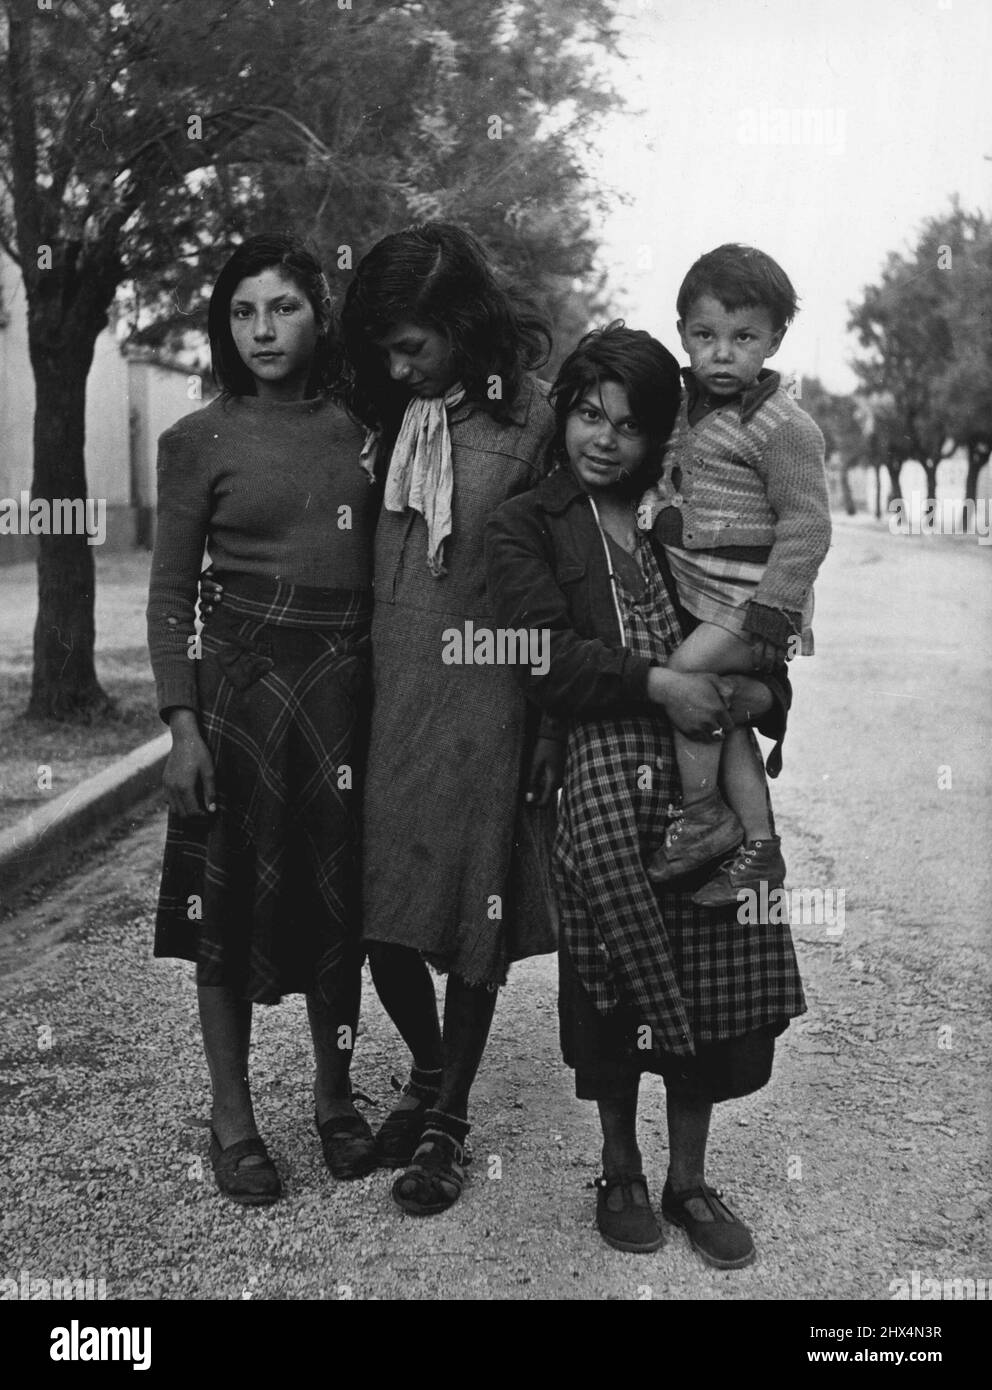 Gypsy Pilgrims - Gipsies are still suspicious of the 'pantres' - which can include anyone who is 'nt Romany. Even one of the older girls here is shy, as they take a walk through Saintes - maries-de la-Mer village soon after arrival for the festival. August 19, 1949. (Photo by Pictorial Press). Stock Photo